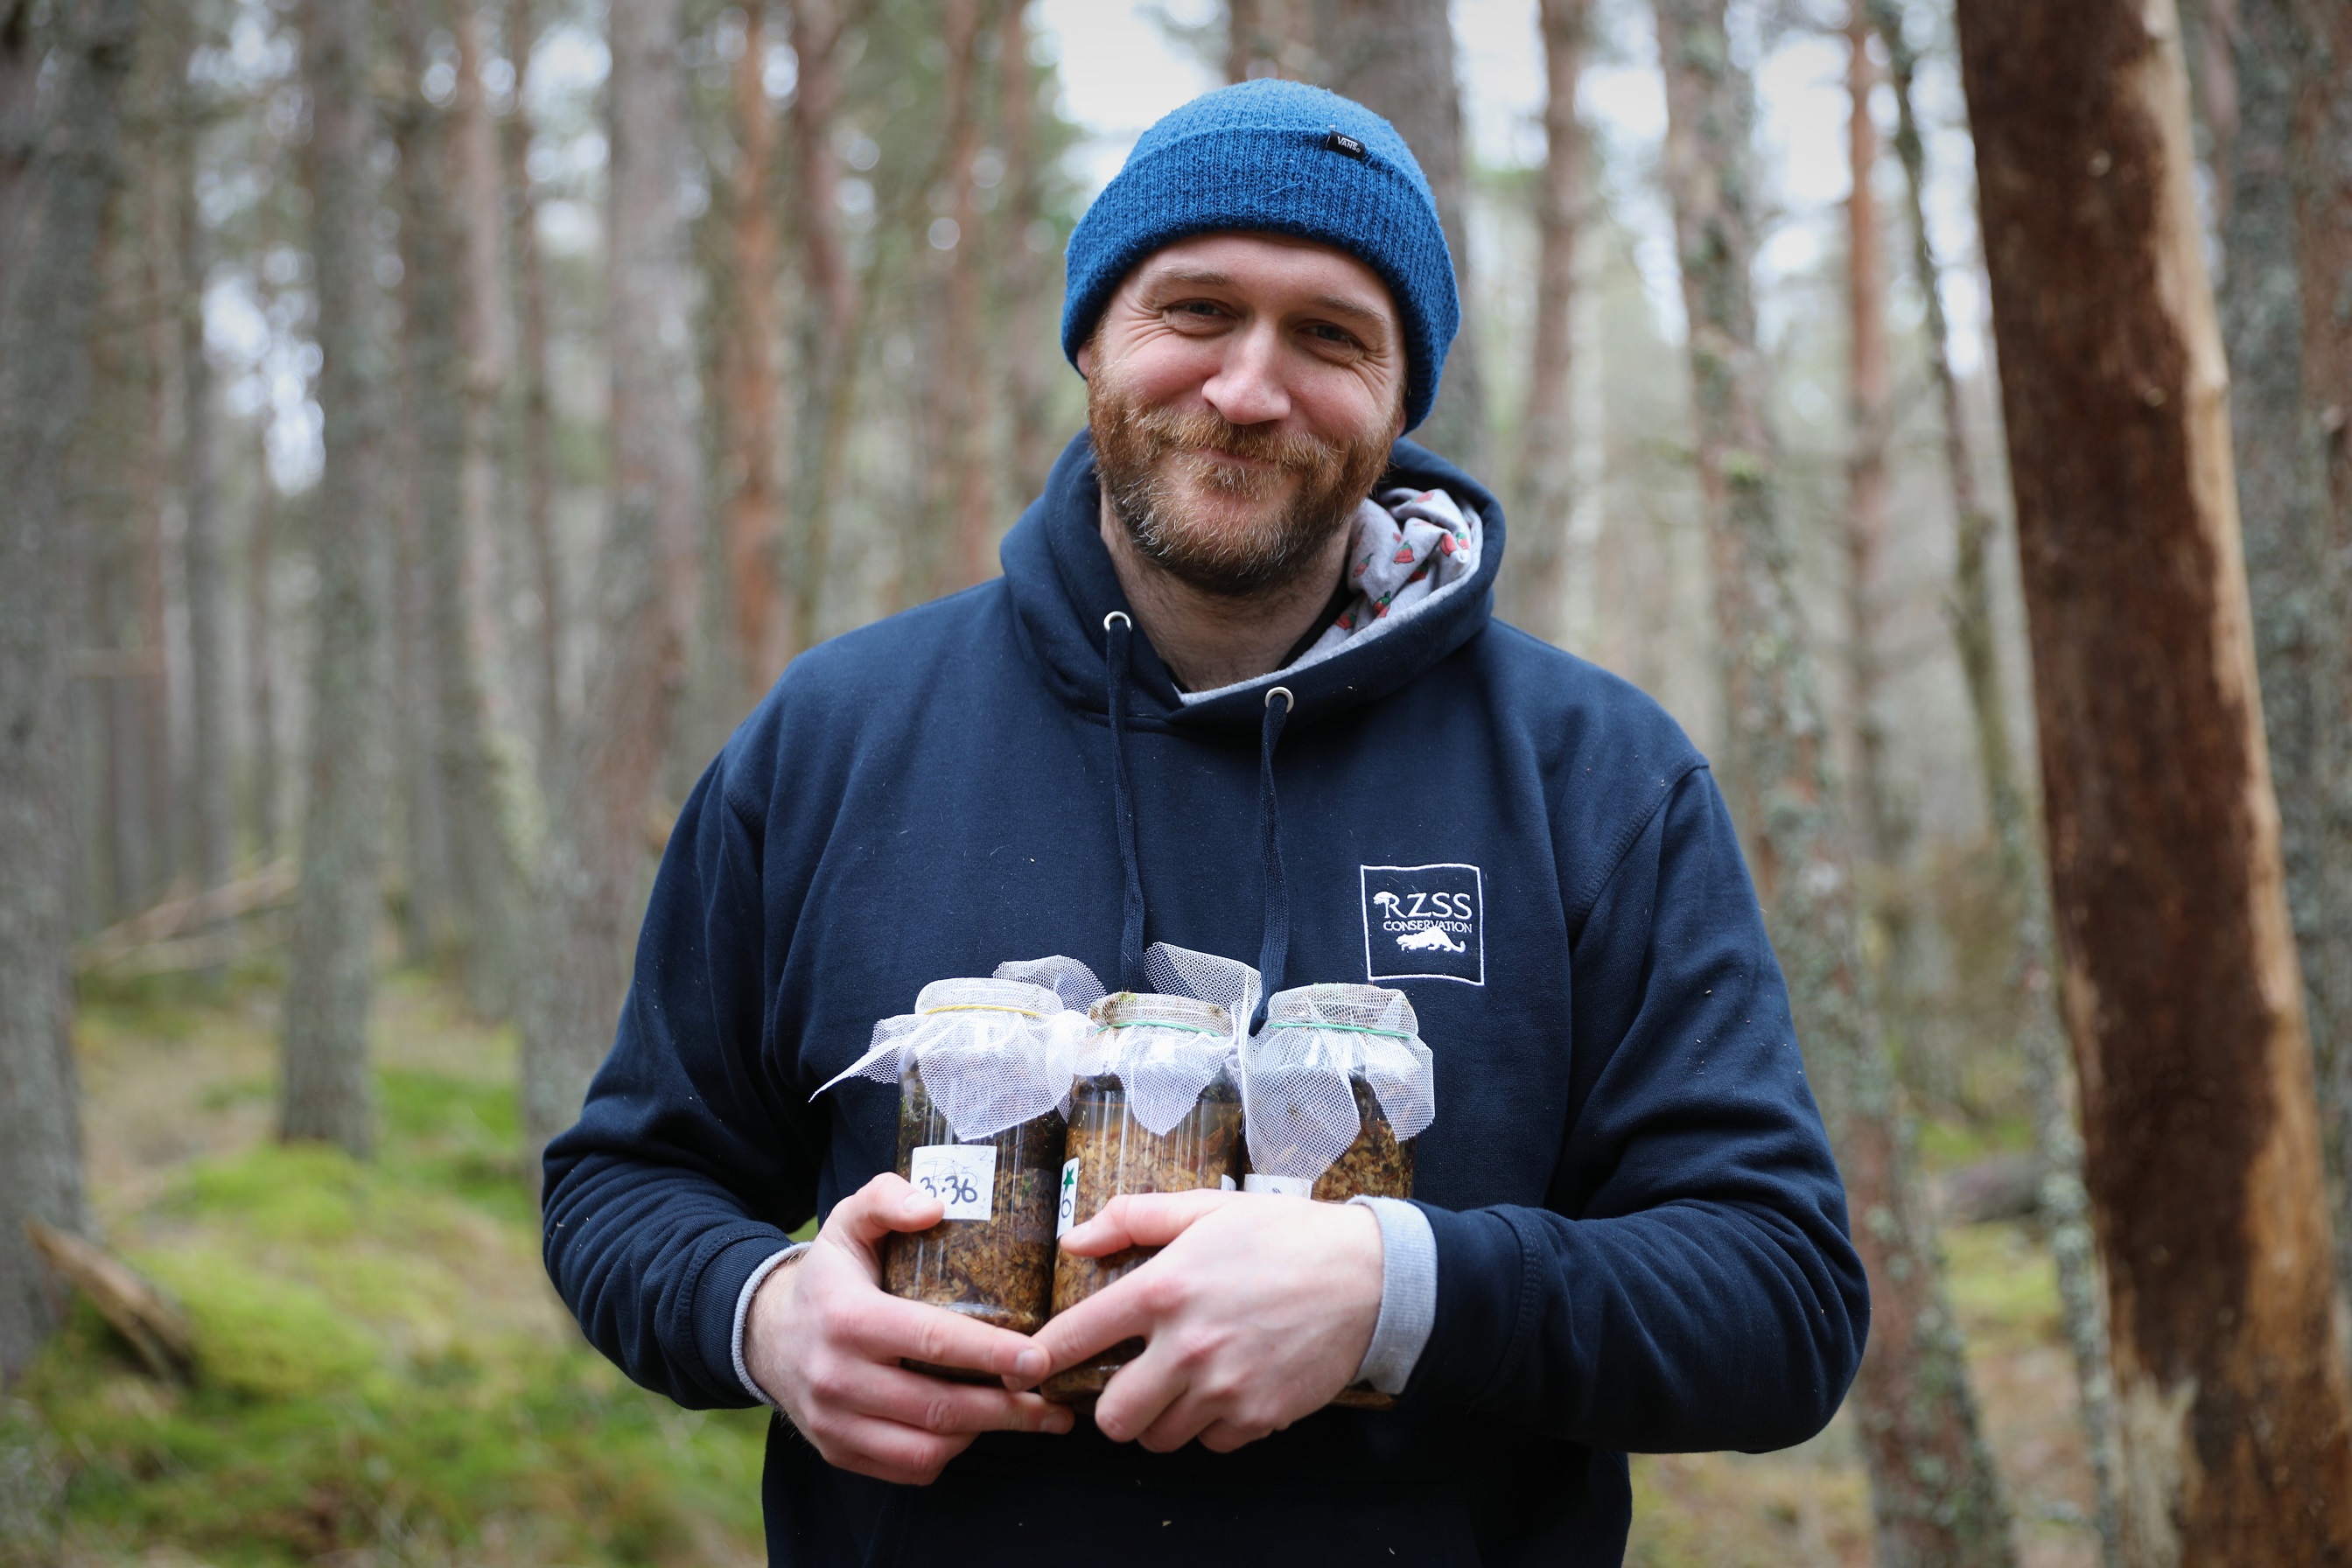 Carl Allott at pine hoverfly release in the Cairngorms

IMAGE: Jess Wise 2021